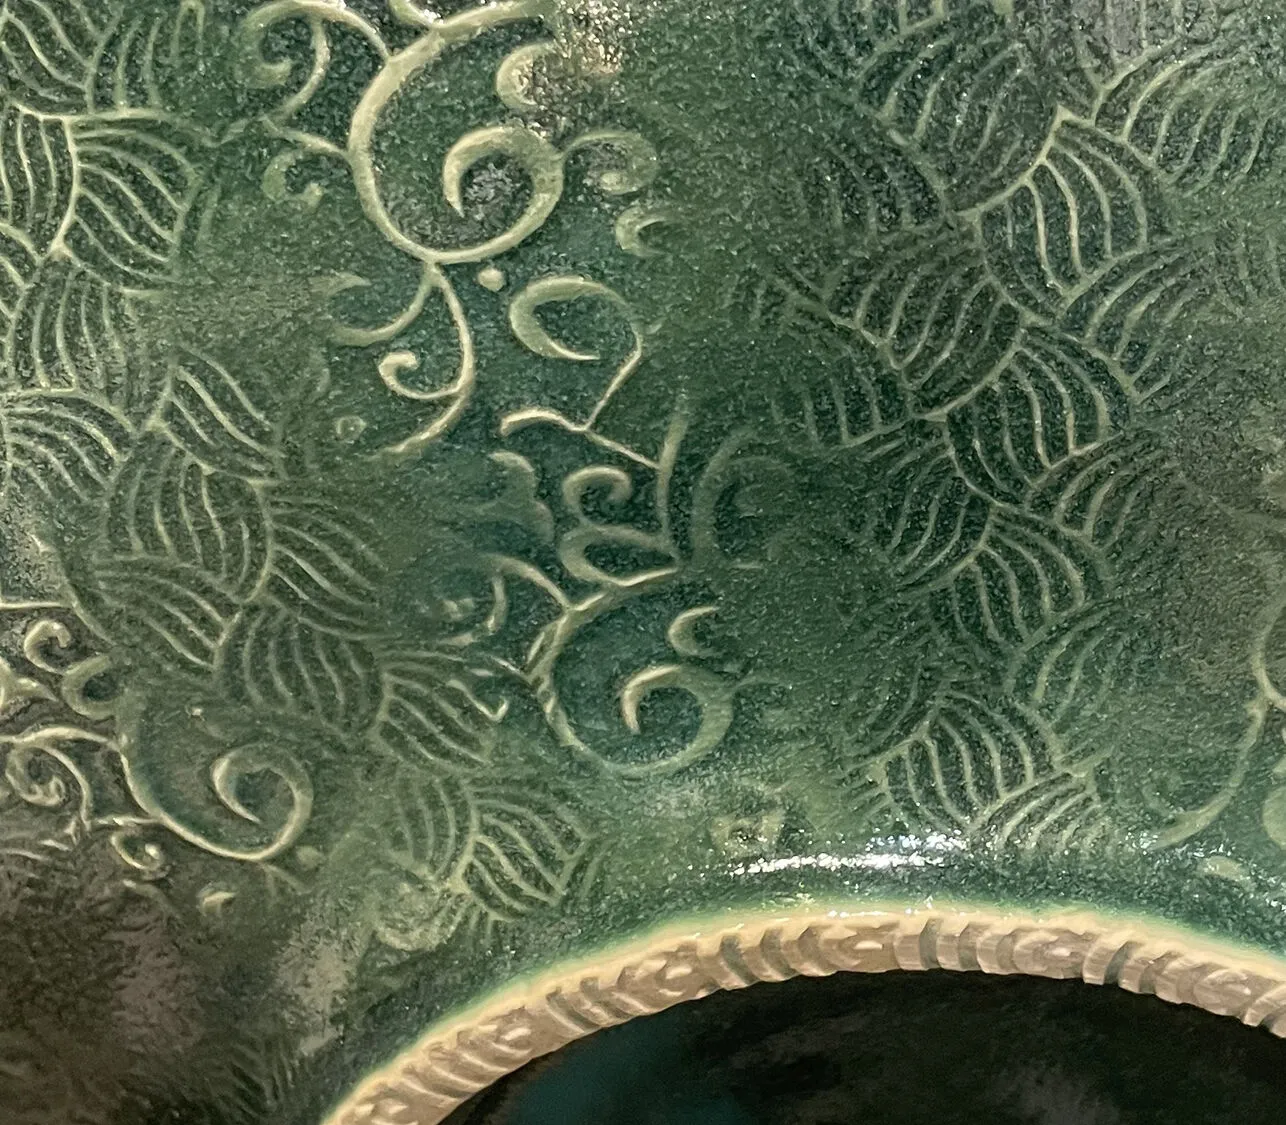 "Braid-Curlicue (detail)" - A close-up for finely etched ceramic with a deep green glaze